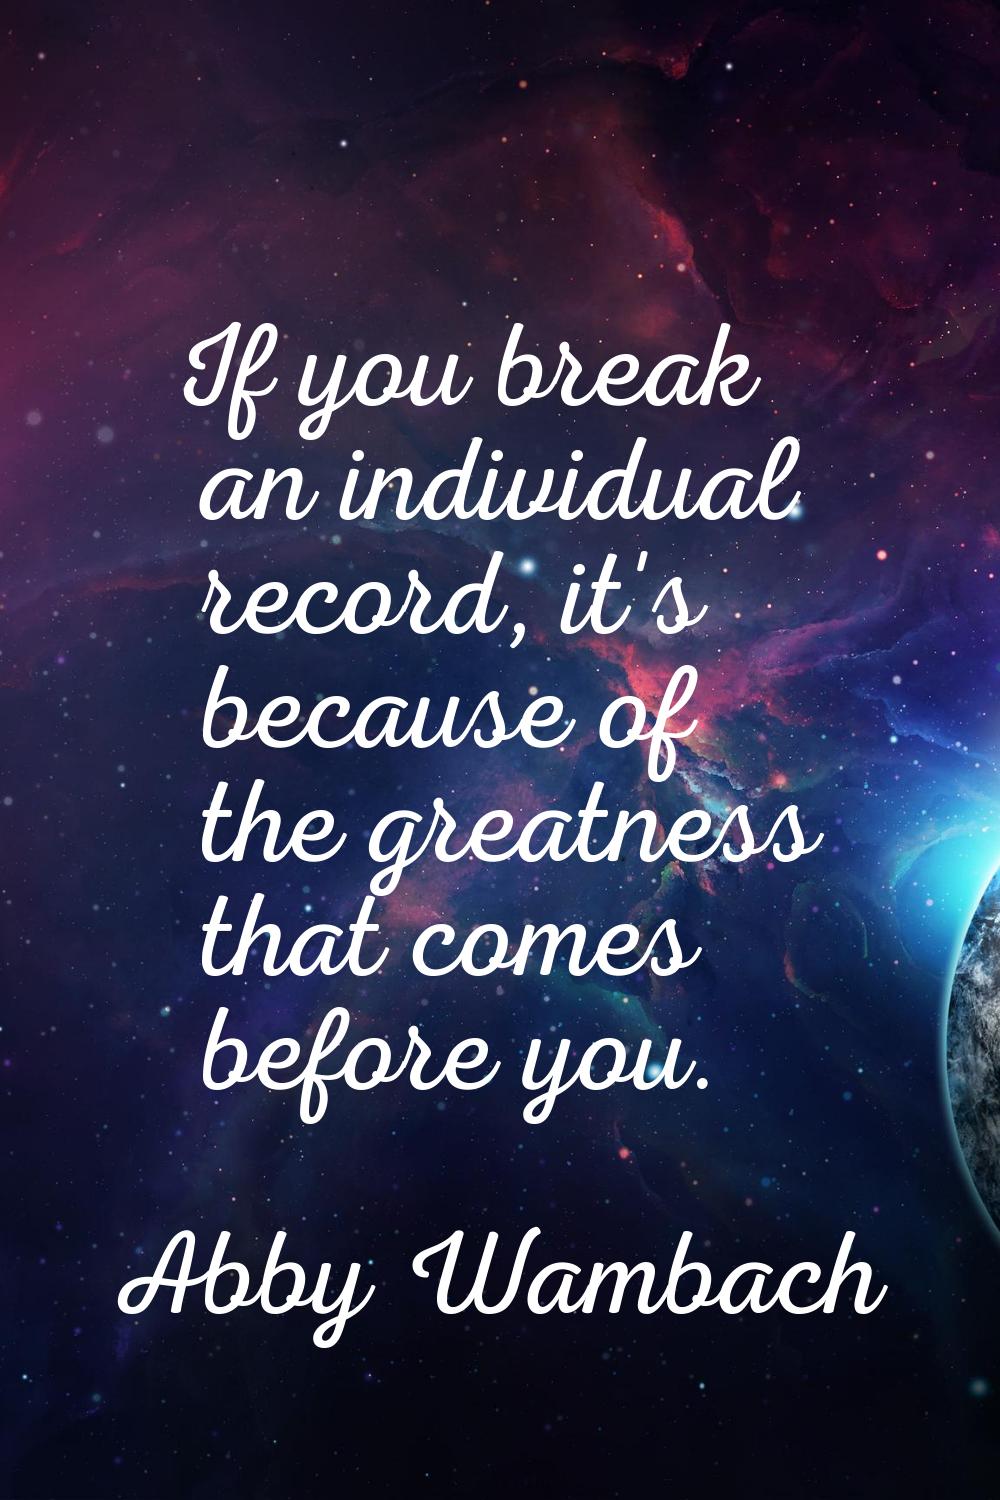 If you break an individual record, it's because of the greatness that comes before you.